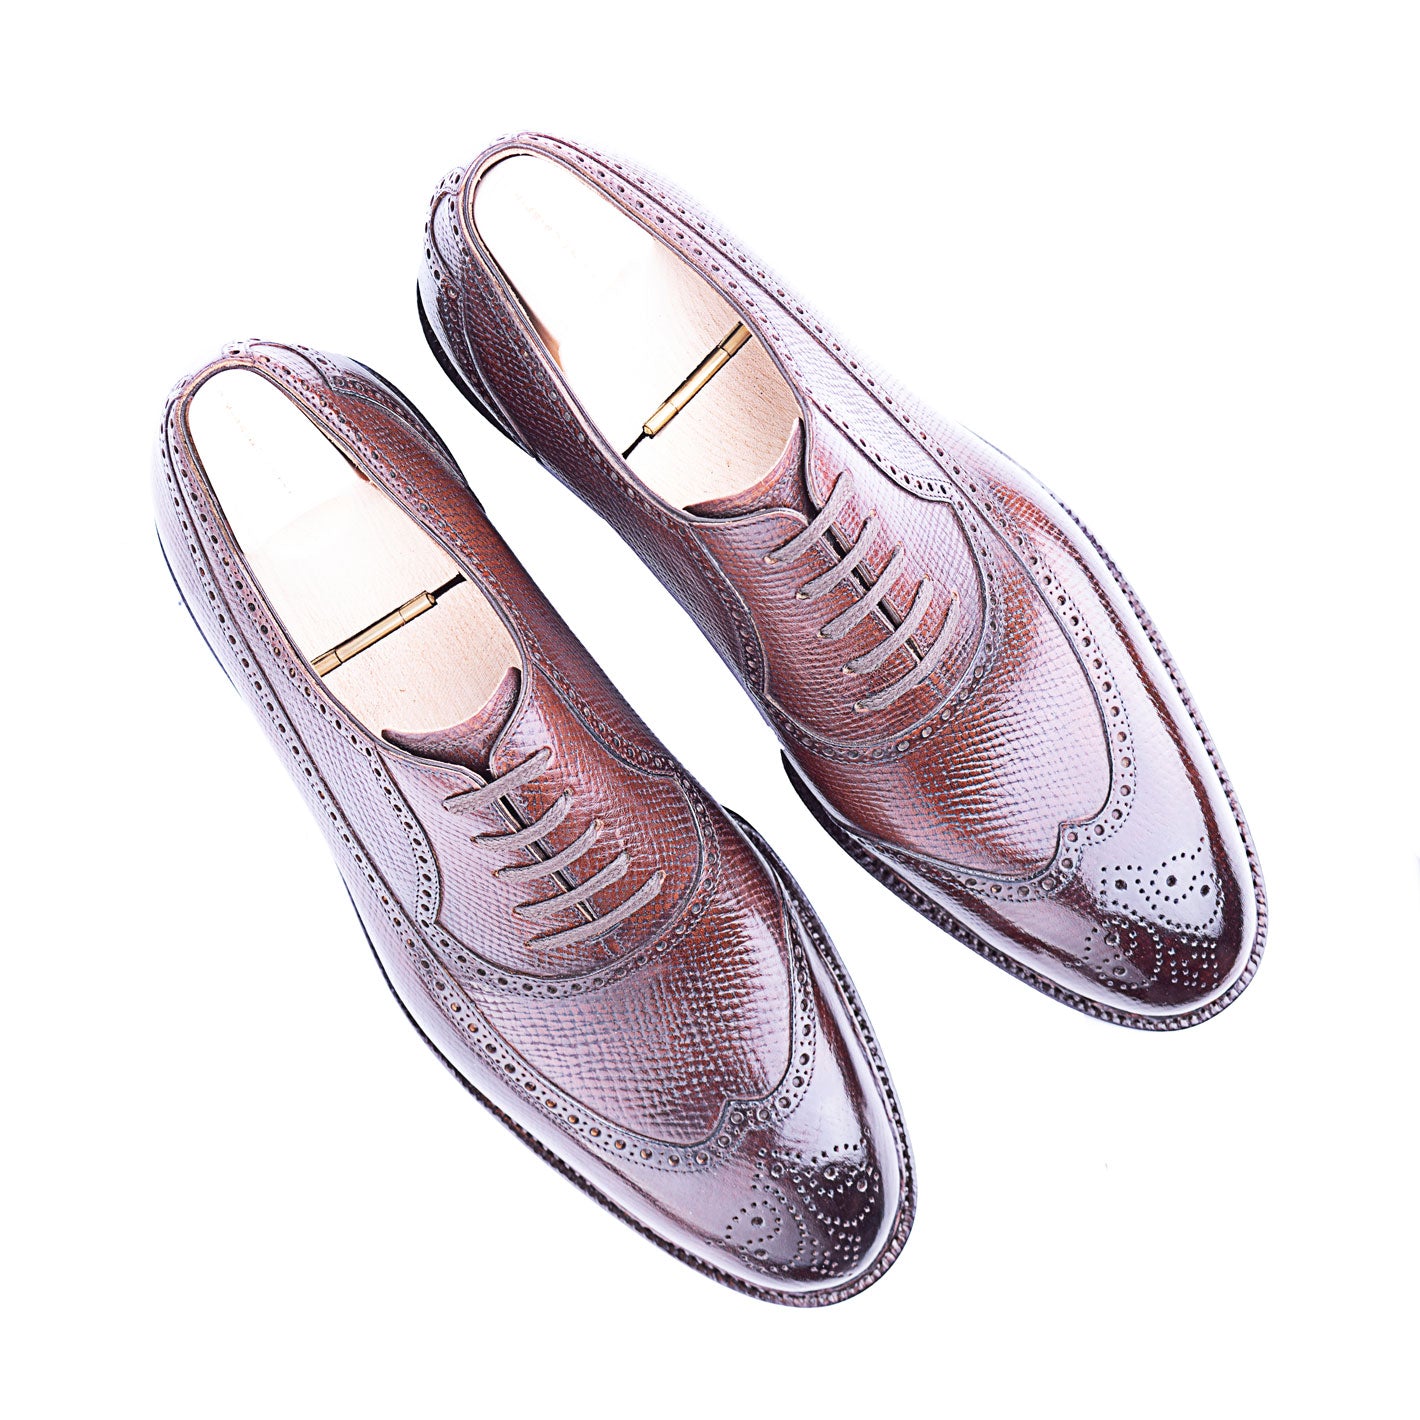 Brogued Oxford with medallion and Higher Cuban Heel